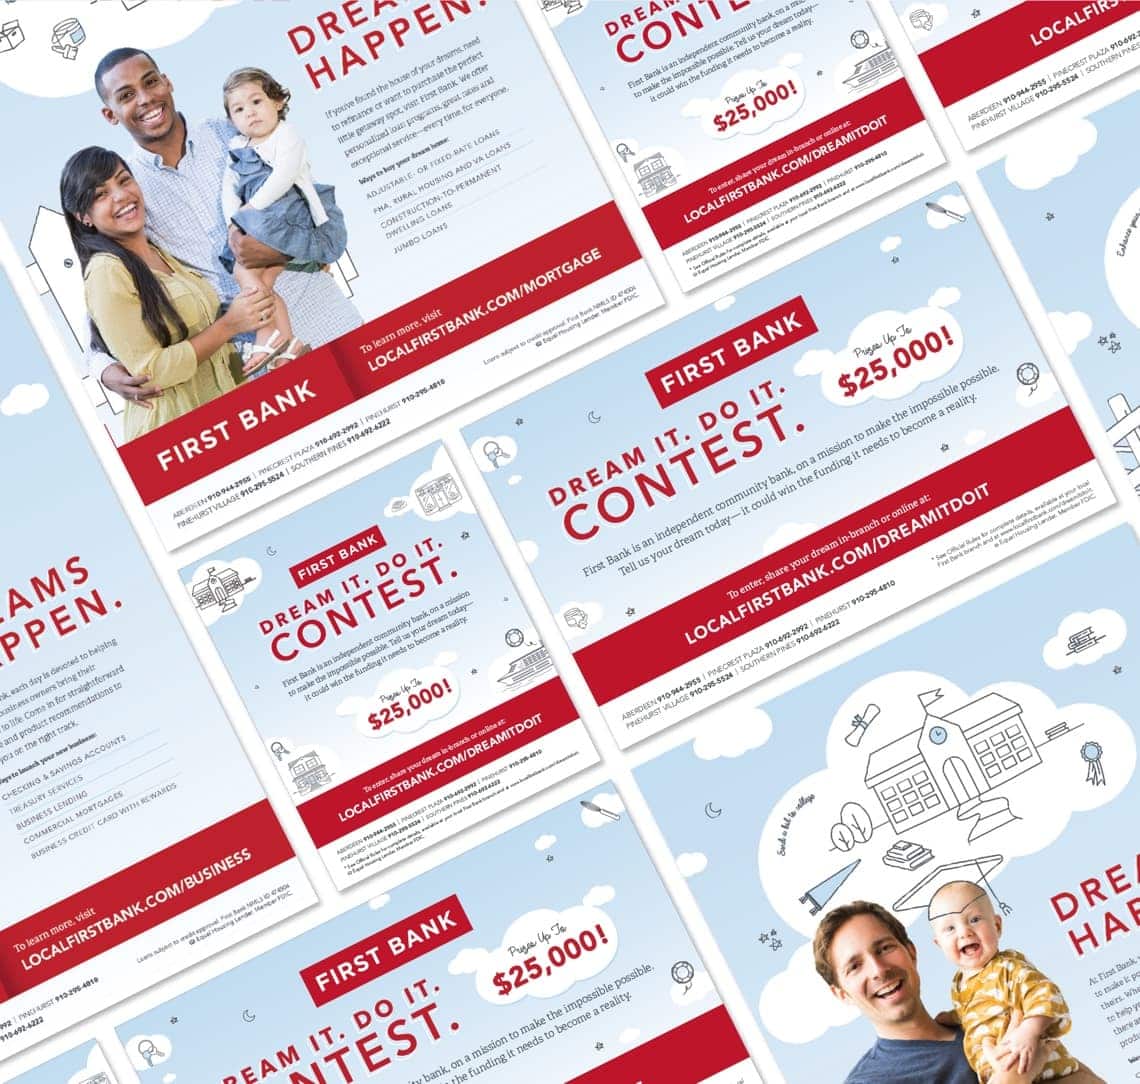 First Bank. Dream It. Do It. Contest It. print materials